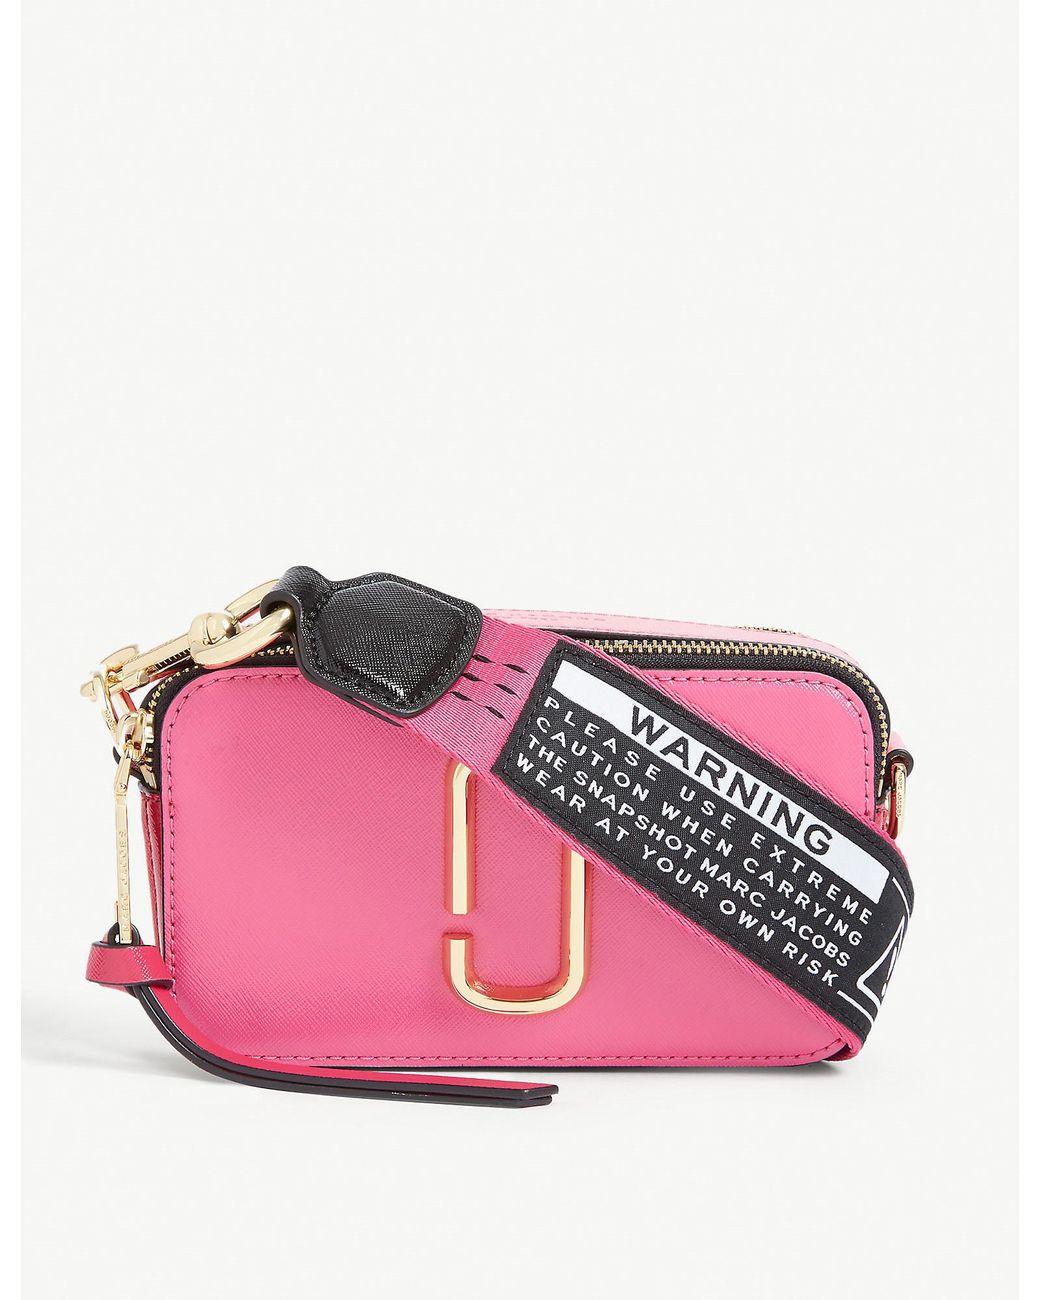 Marc Jacobs Snapshot Leather Bag Pink Crossbody Strap Authentic